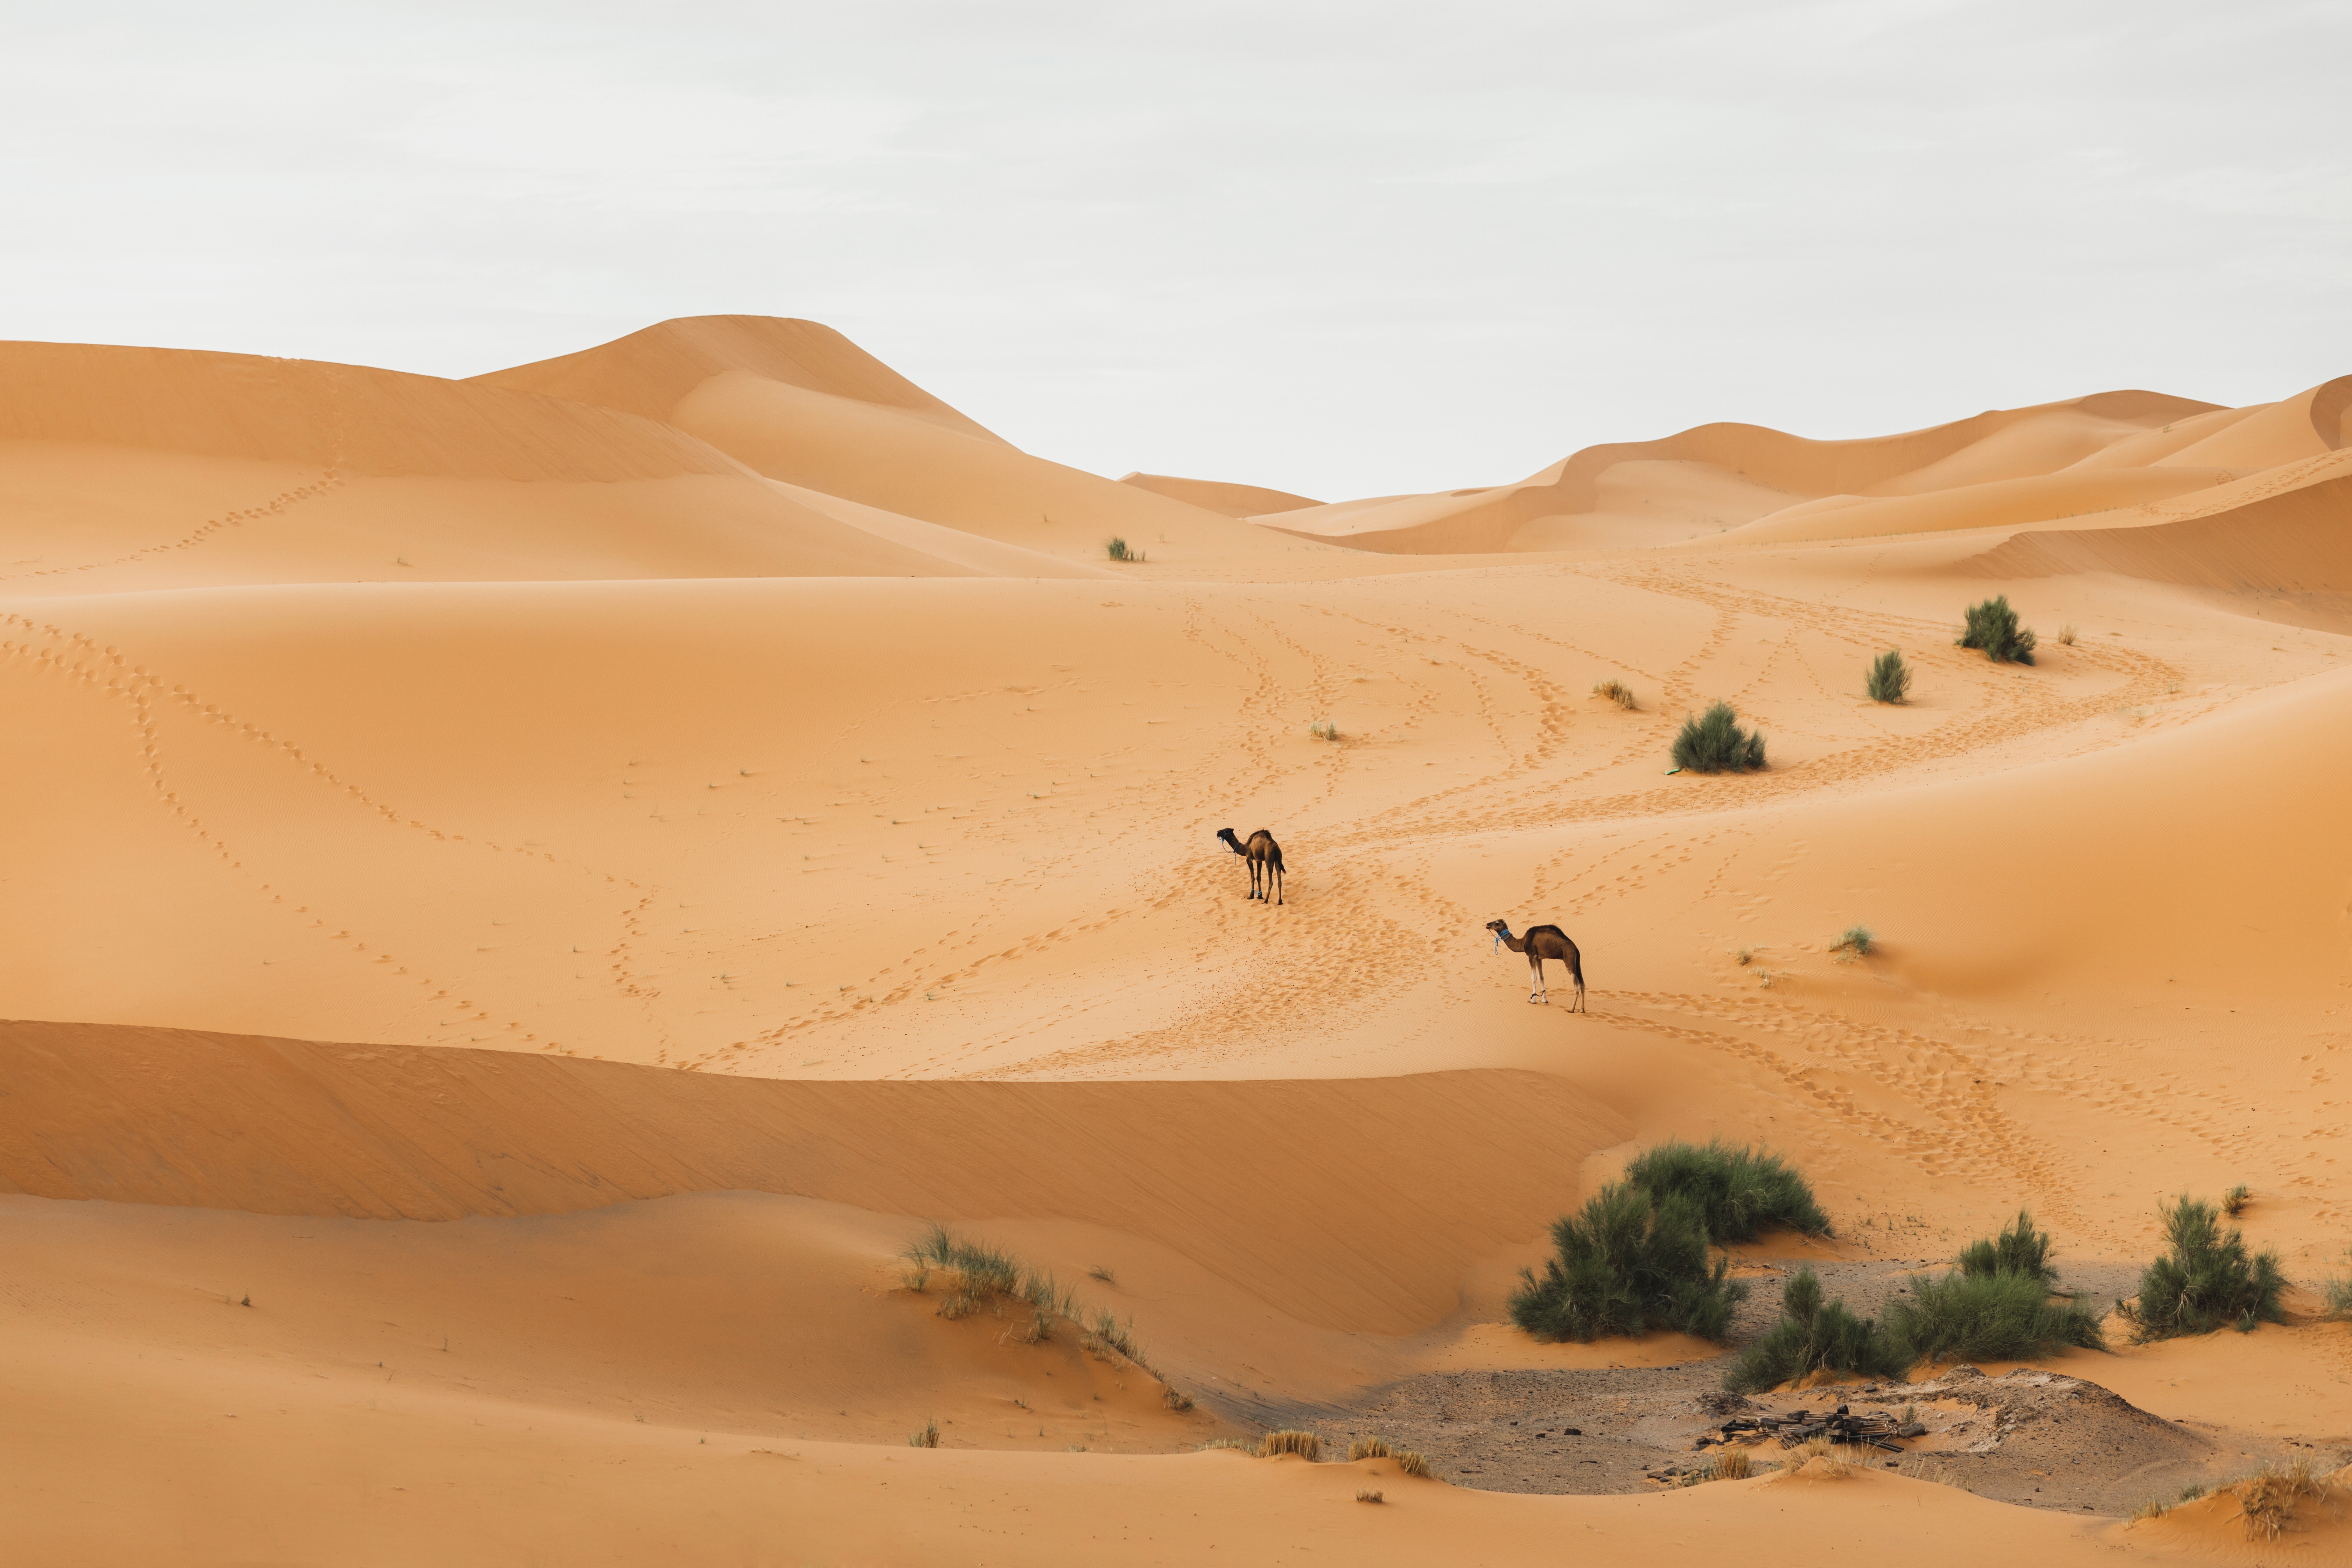 Two camel walking in Sahara desert, Morocco. Sand dunes on background. African animals